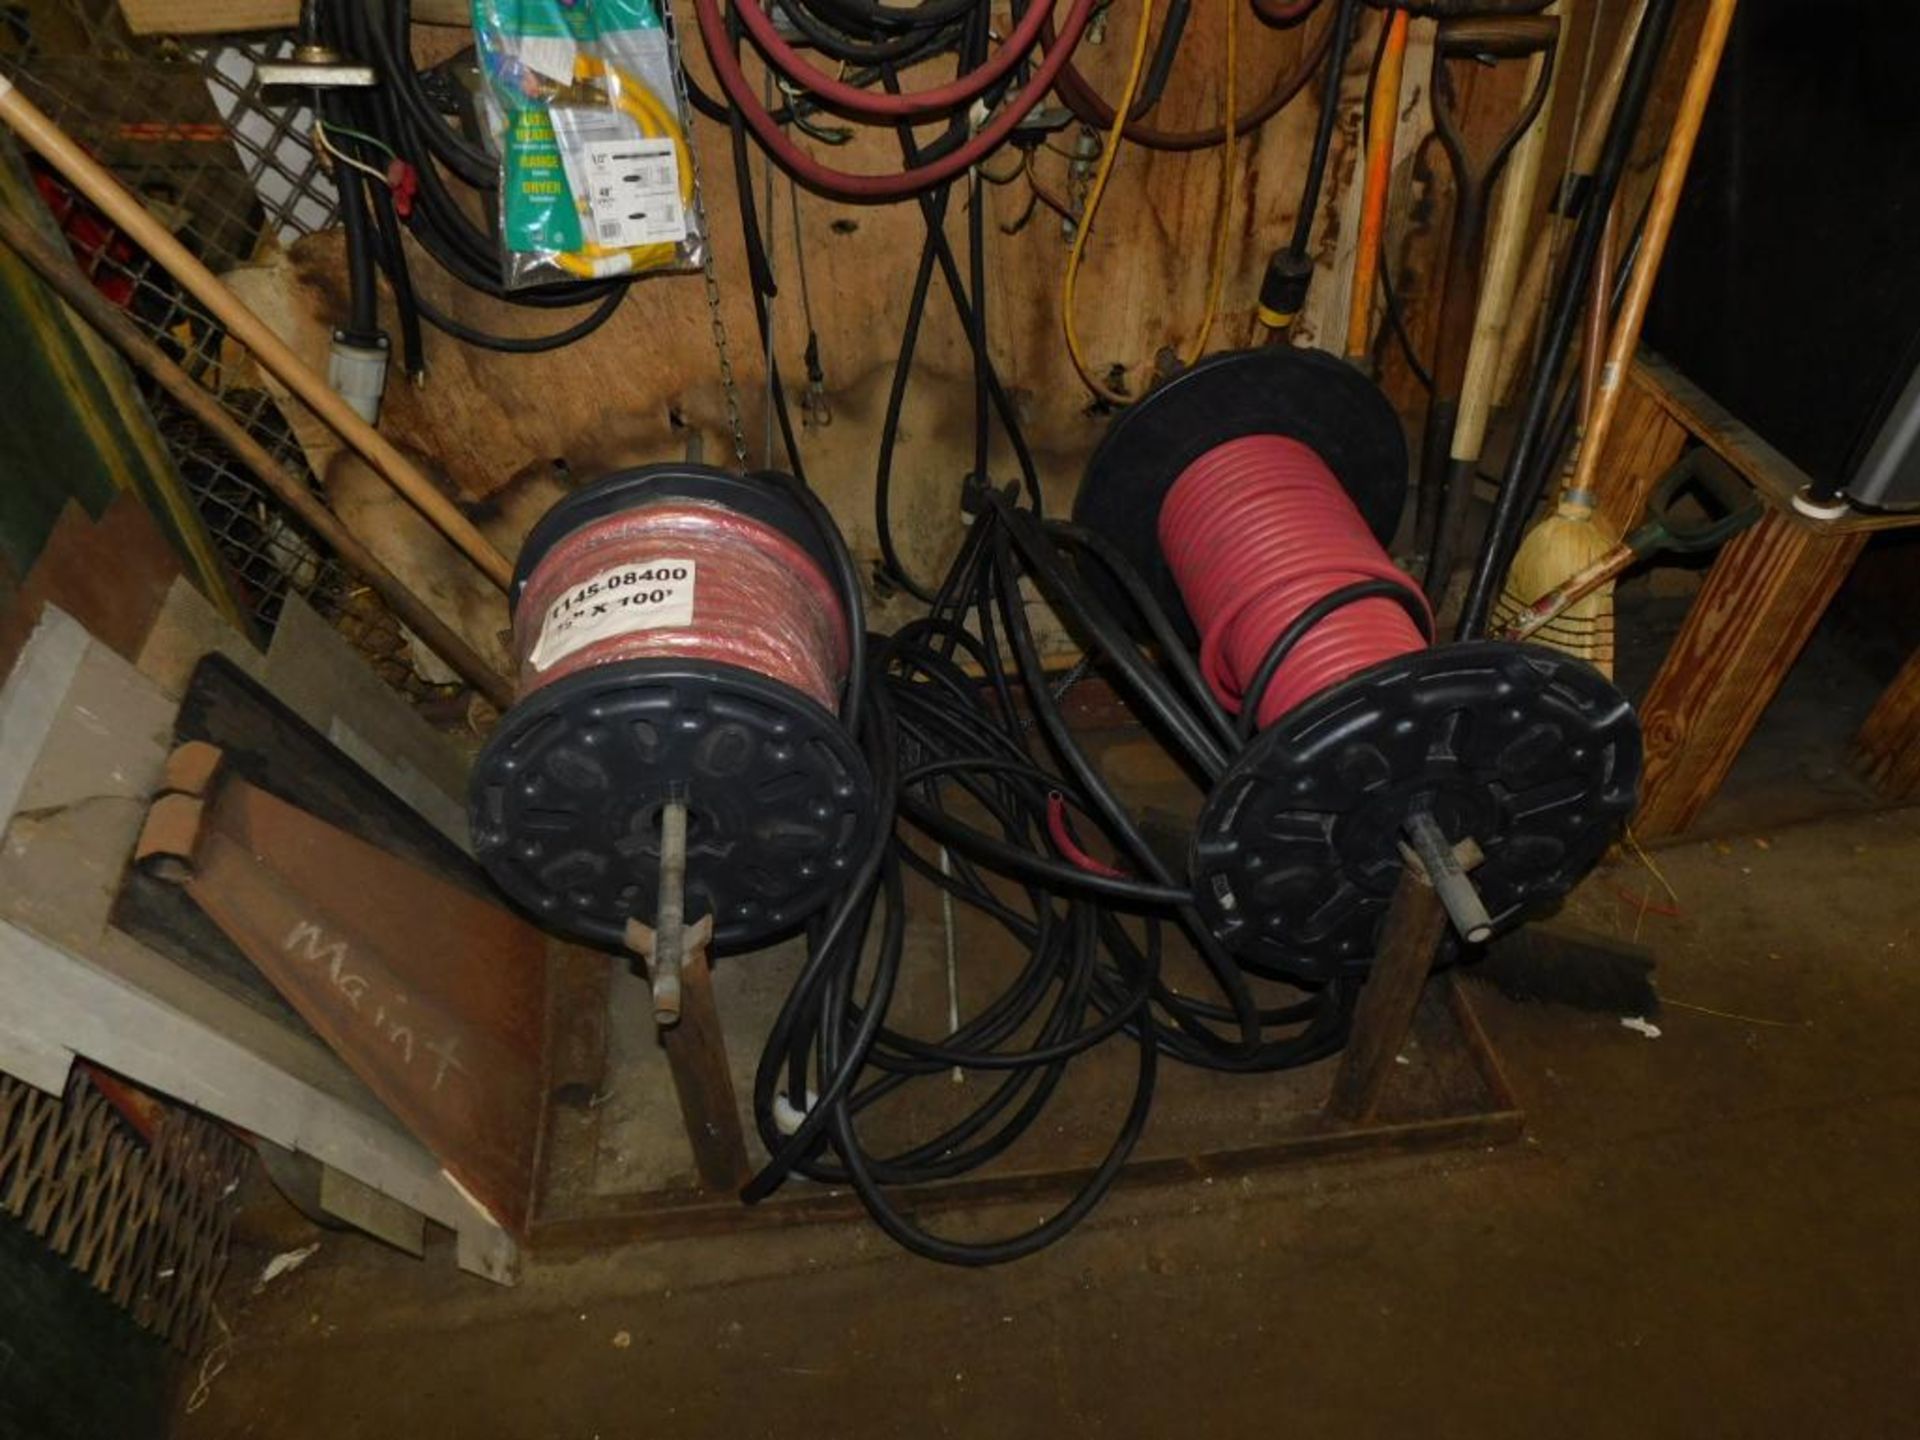 LOT: Contents of Back Maintenance Room: (2) Racks of Contents, Machine Parts, Hosing, Wire, Parts Wa - Image 15 of 16